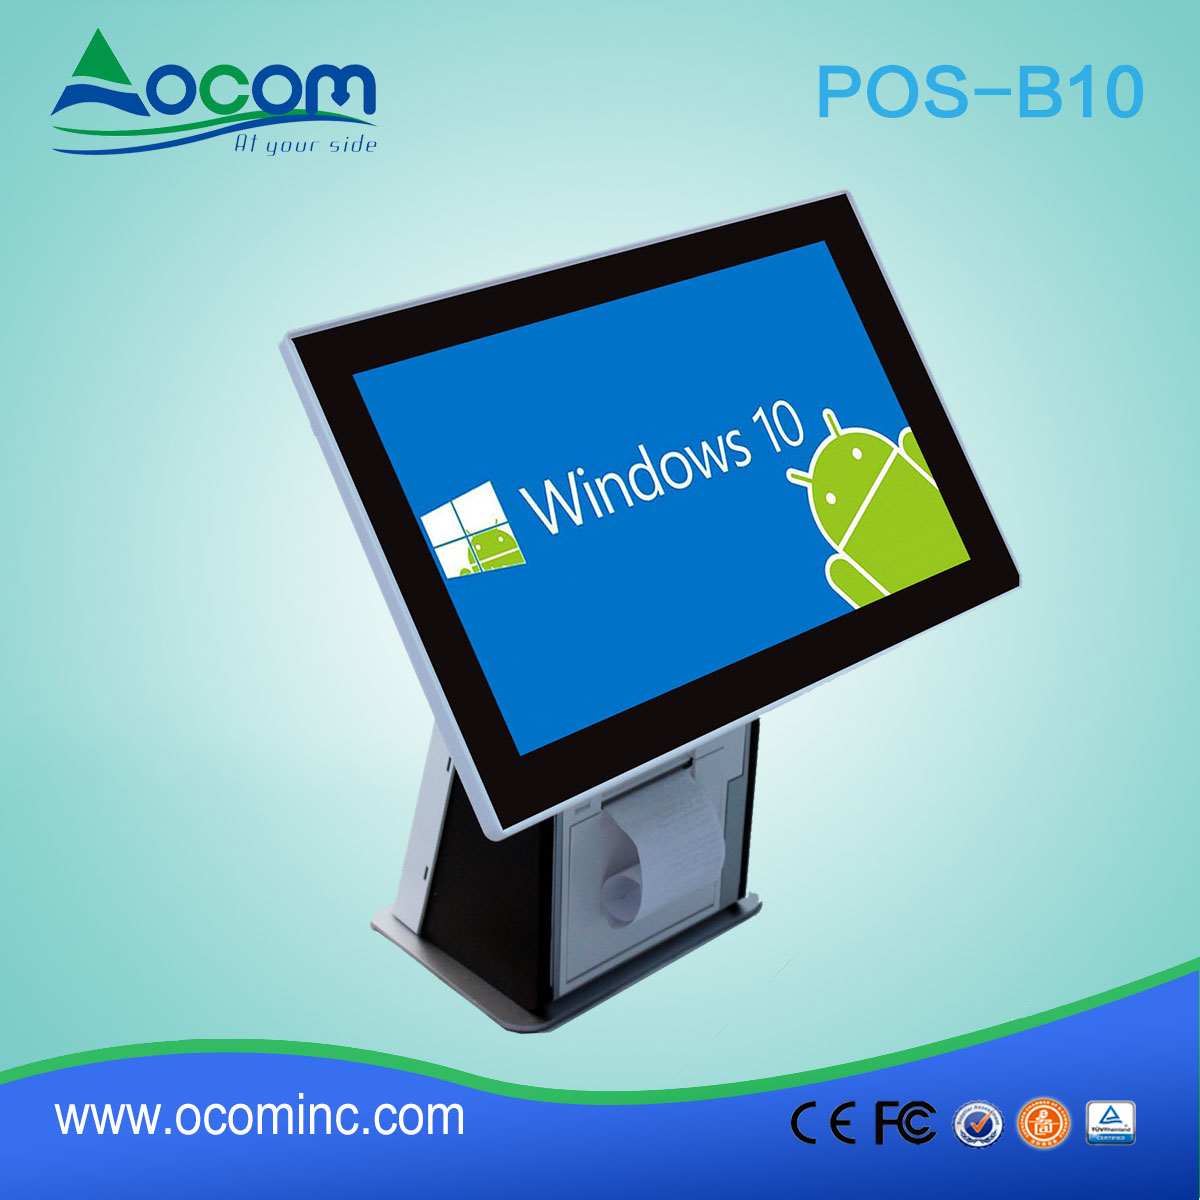 POS-B10---China made 10.1" touch screen pos terminal with thermal printer all in one price